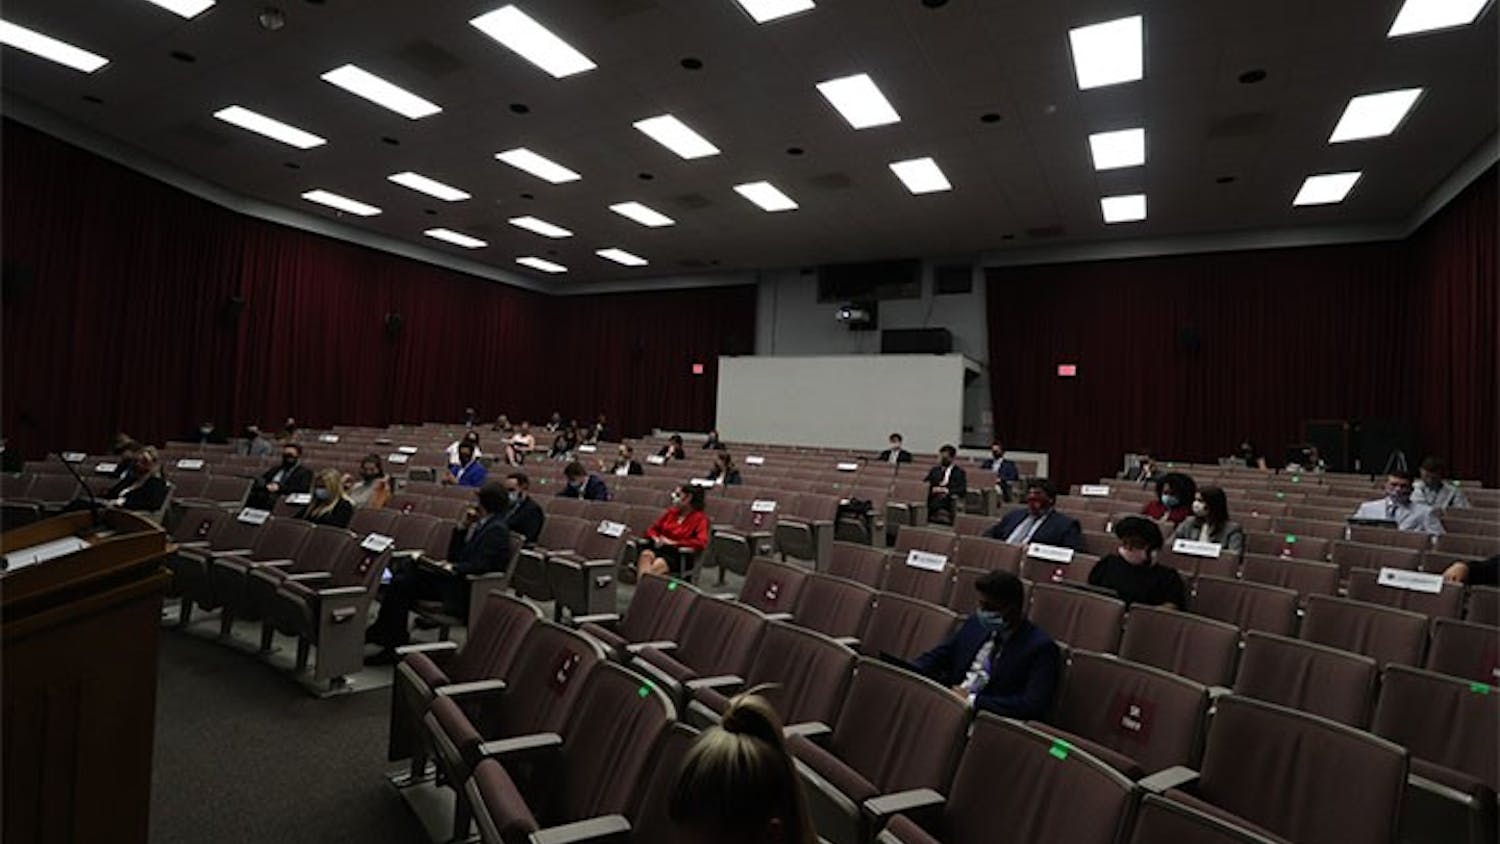 Student senate is held in the Russell House Theater. The chairs within the theater are marked to follow campus guidelines regarding COVID-19.
